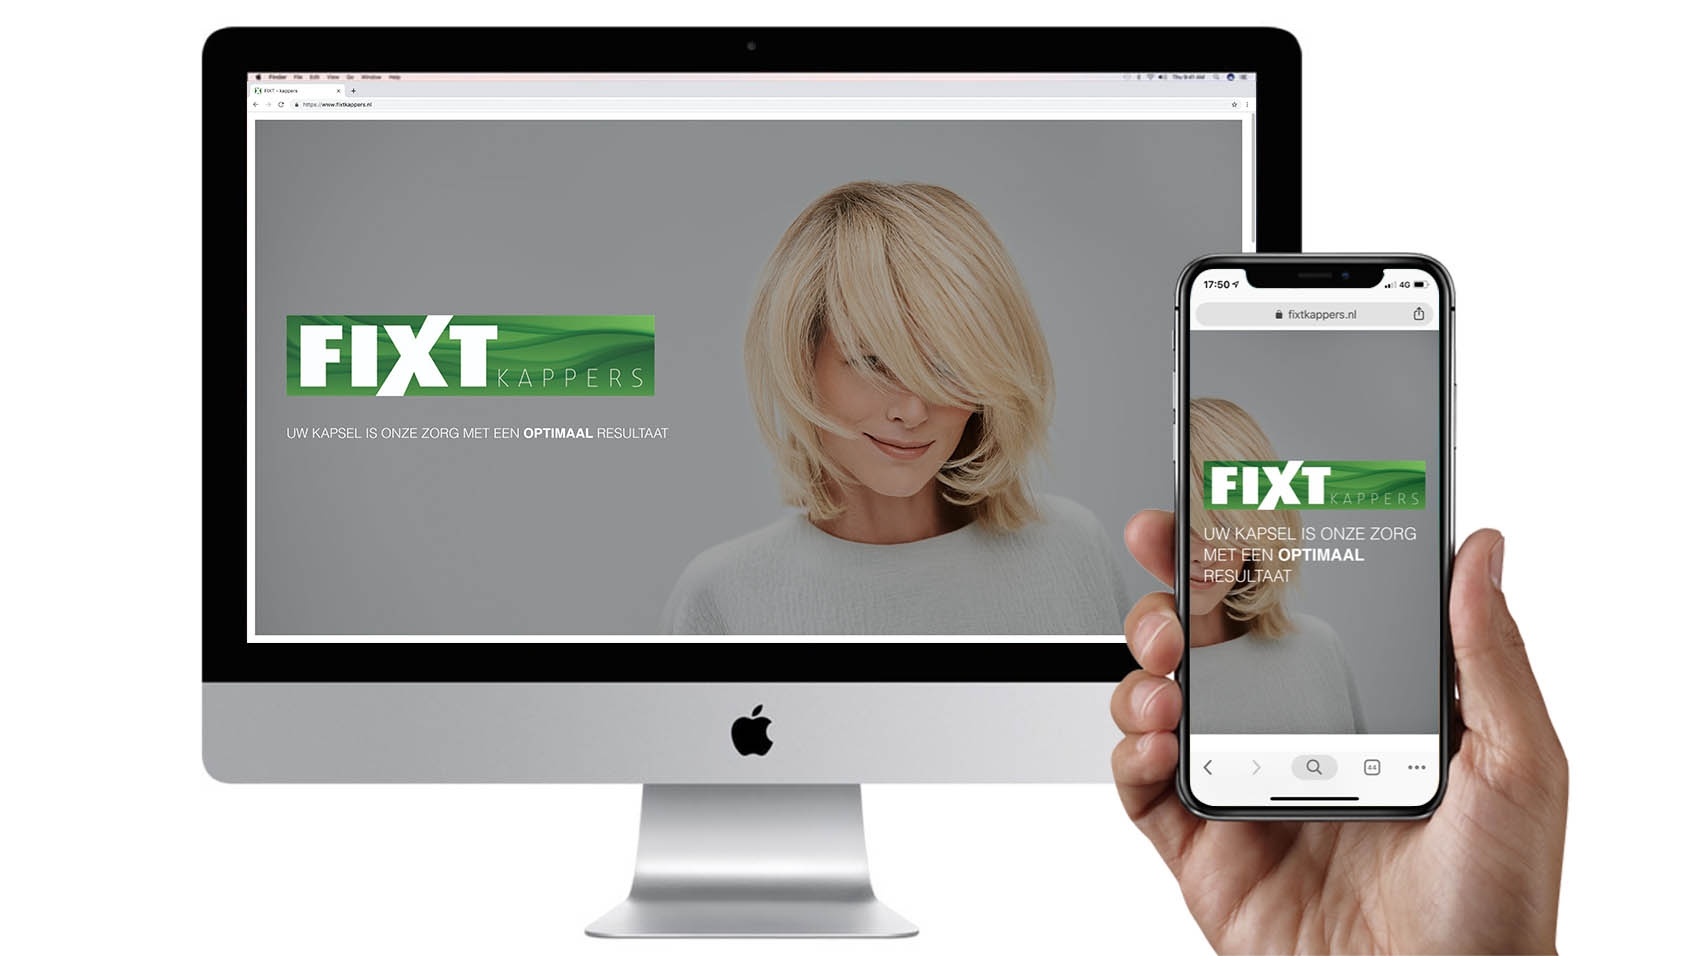 Site_FixtKappers_iphone_imac